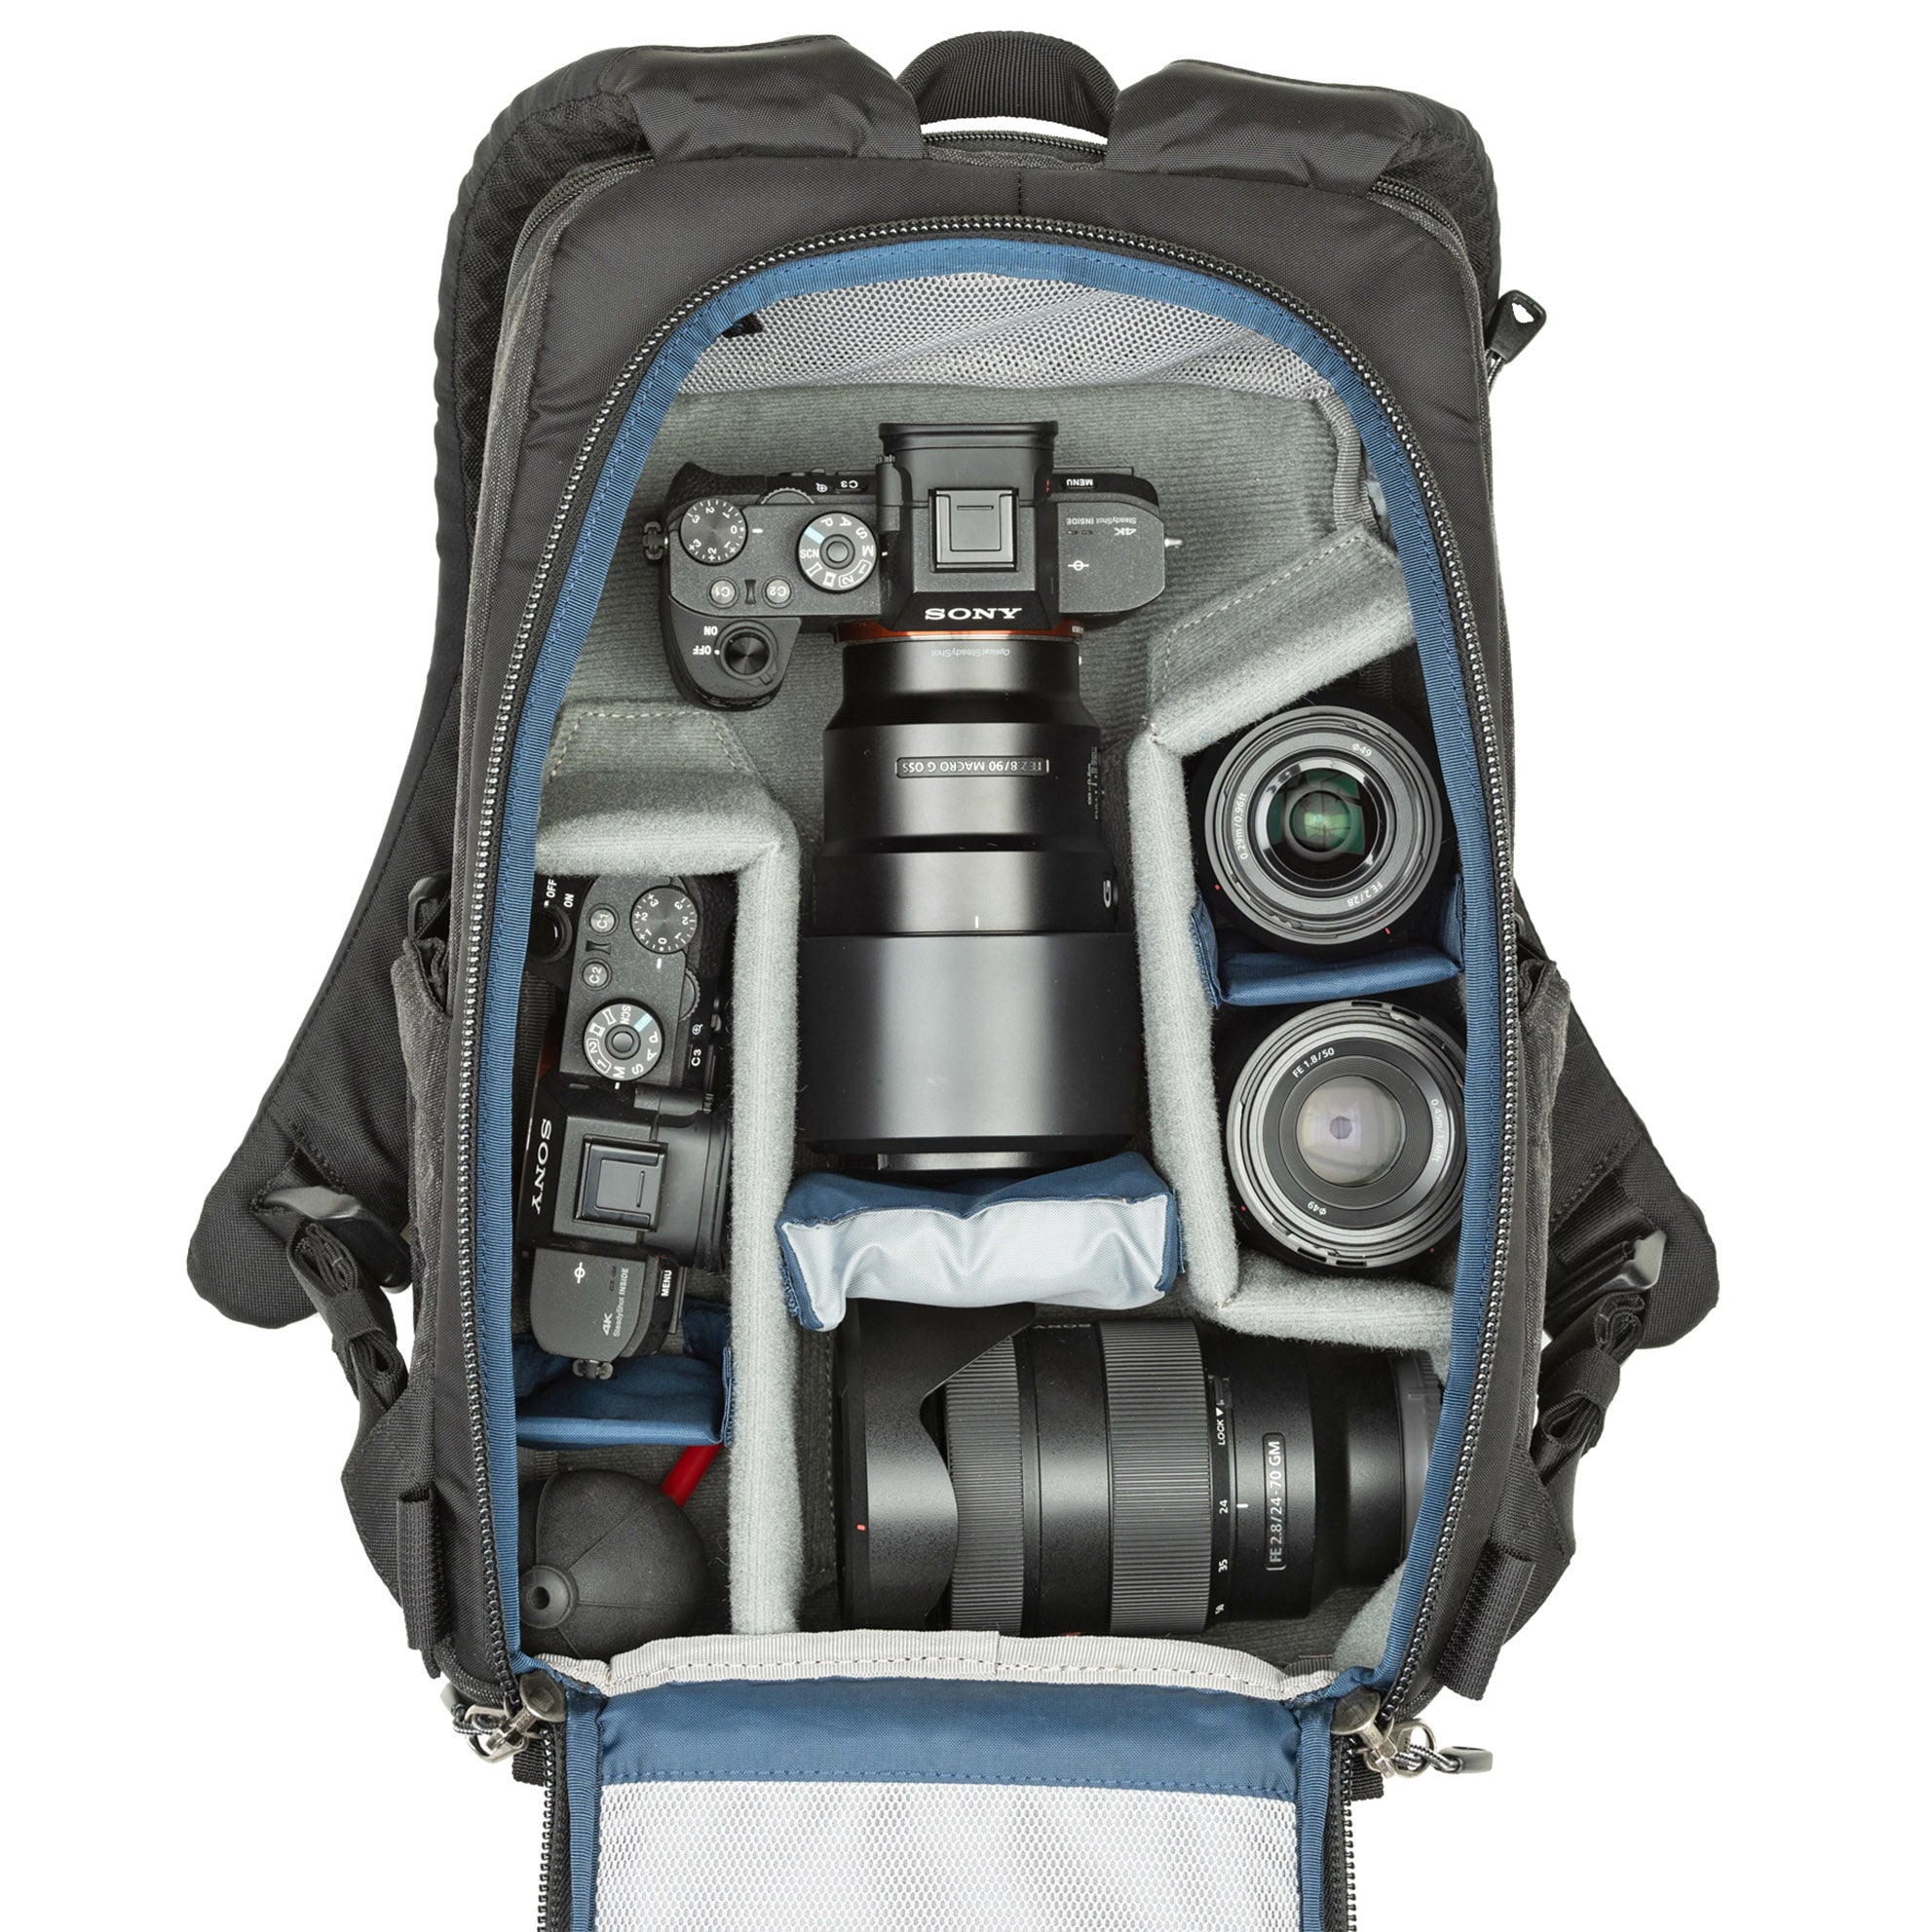 1–2 ungripped DSLR or Mirrorless body with lens attached up to a 70–200mm f/2.8, 1–3 additional lenses, a strobe, a 13” laptop, plus personal gear